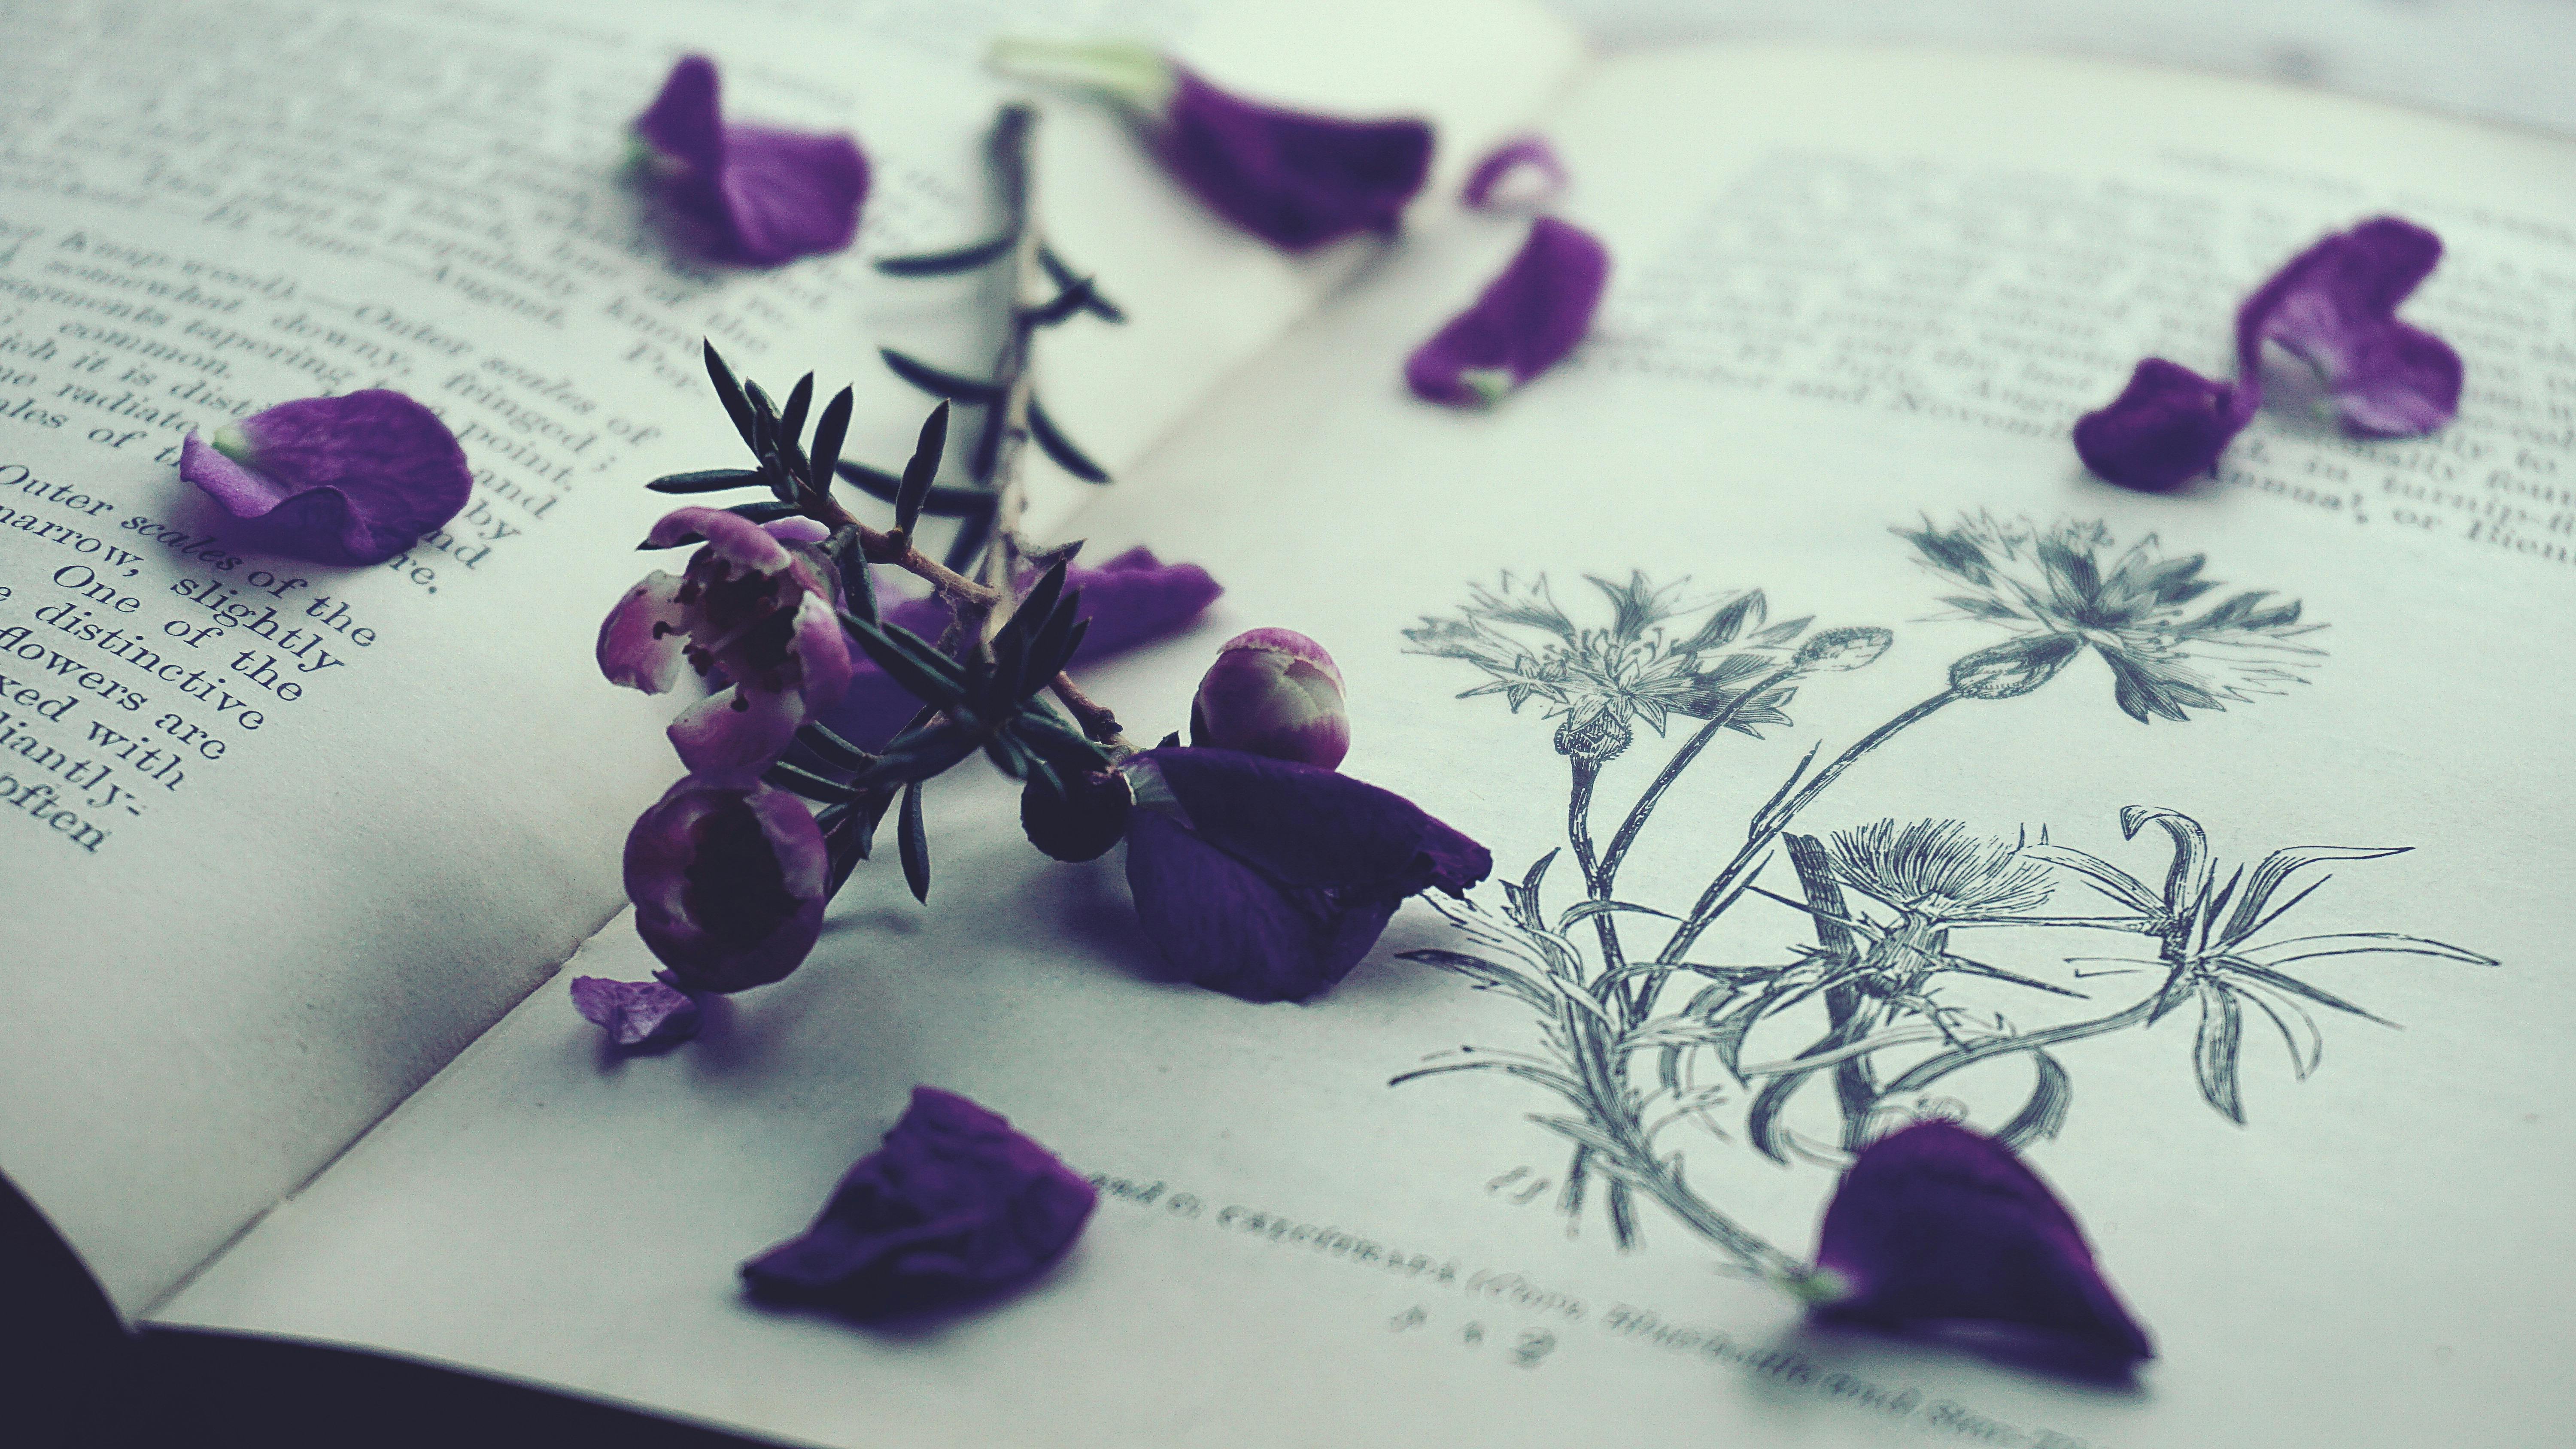 Purple petals scattered on the pages of an open book.